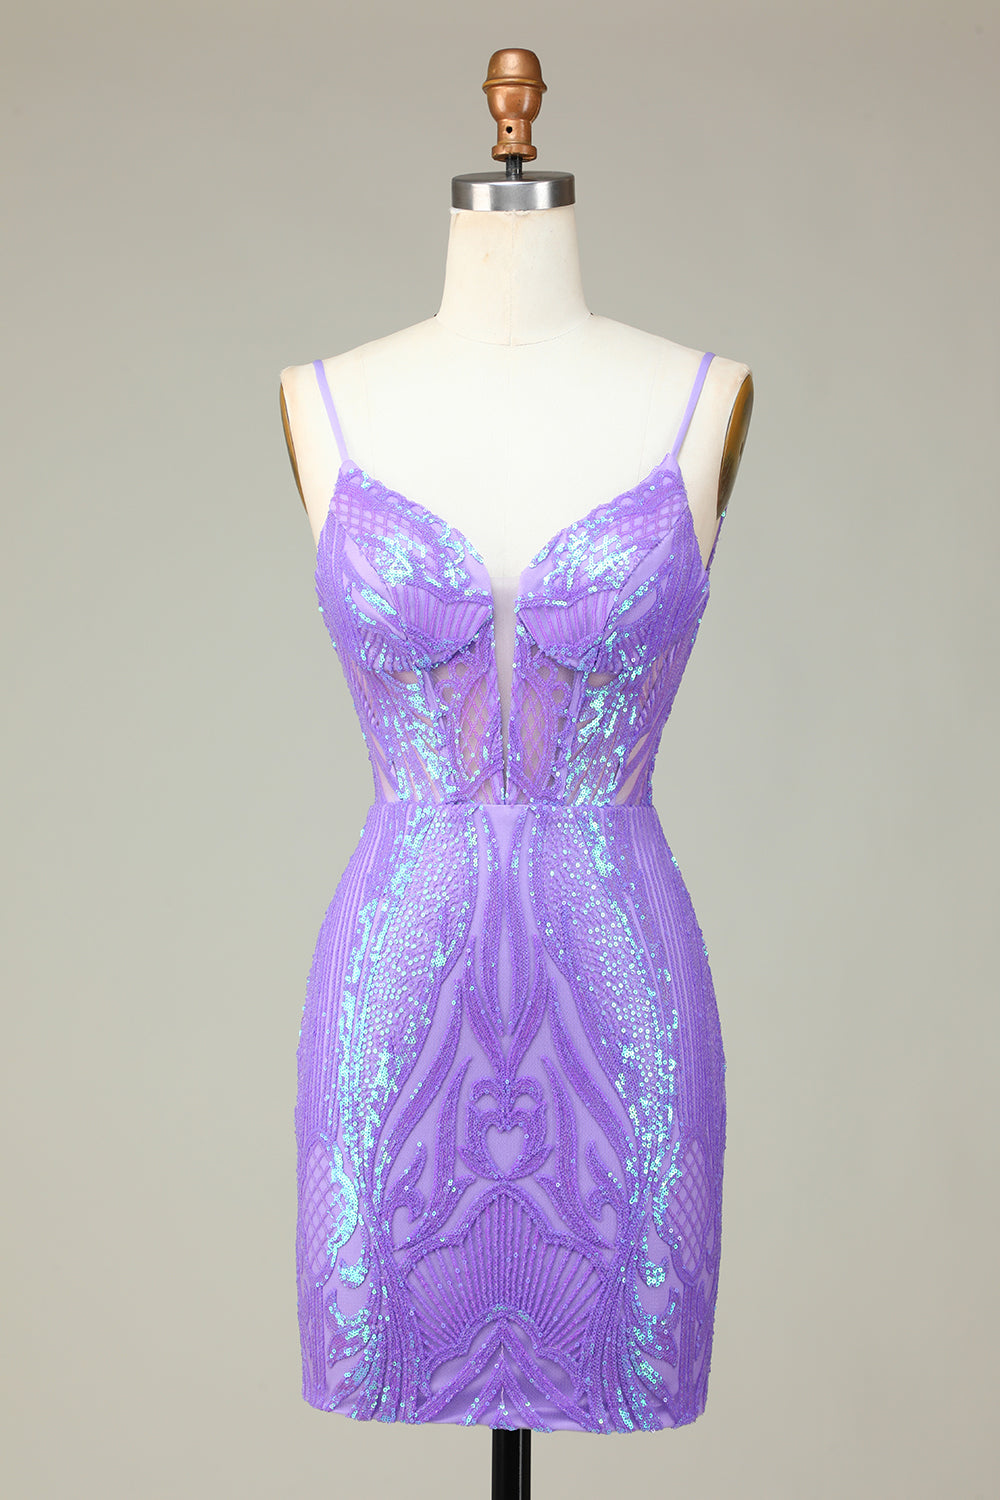 Stylish Bodycon Spaghetti Straps Lilac Sequins Corset Homecoming Dress with Criss Cross Back